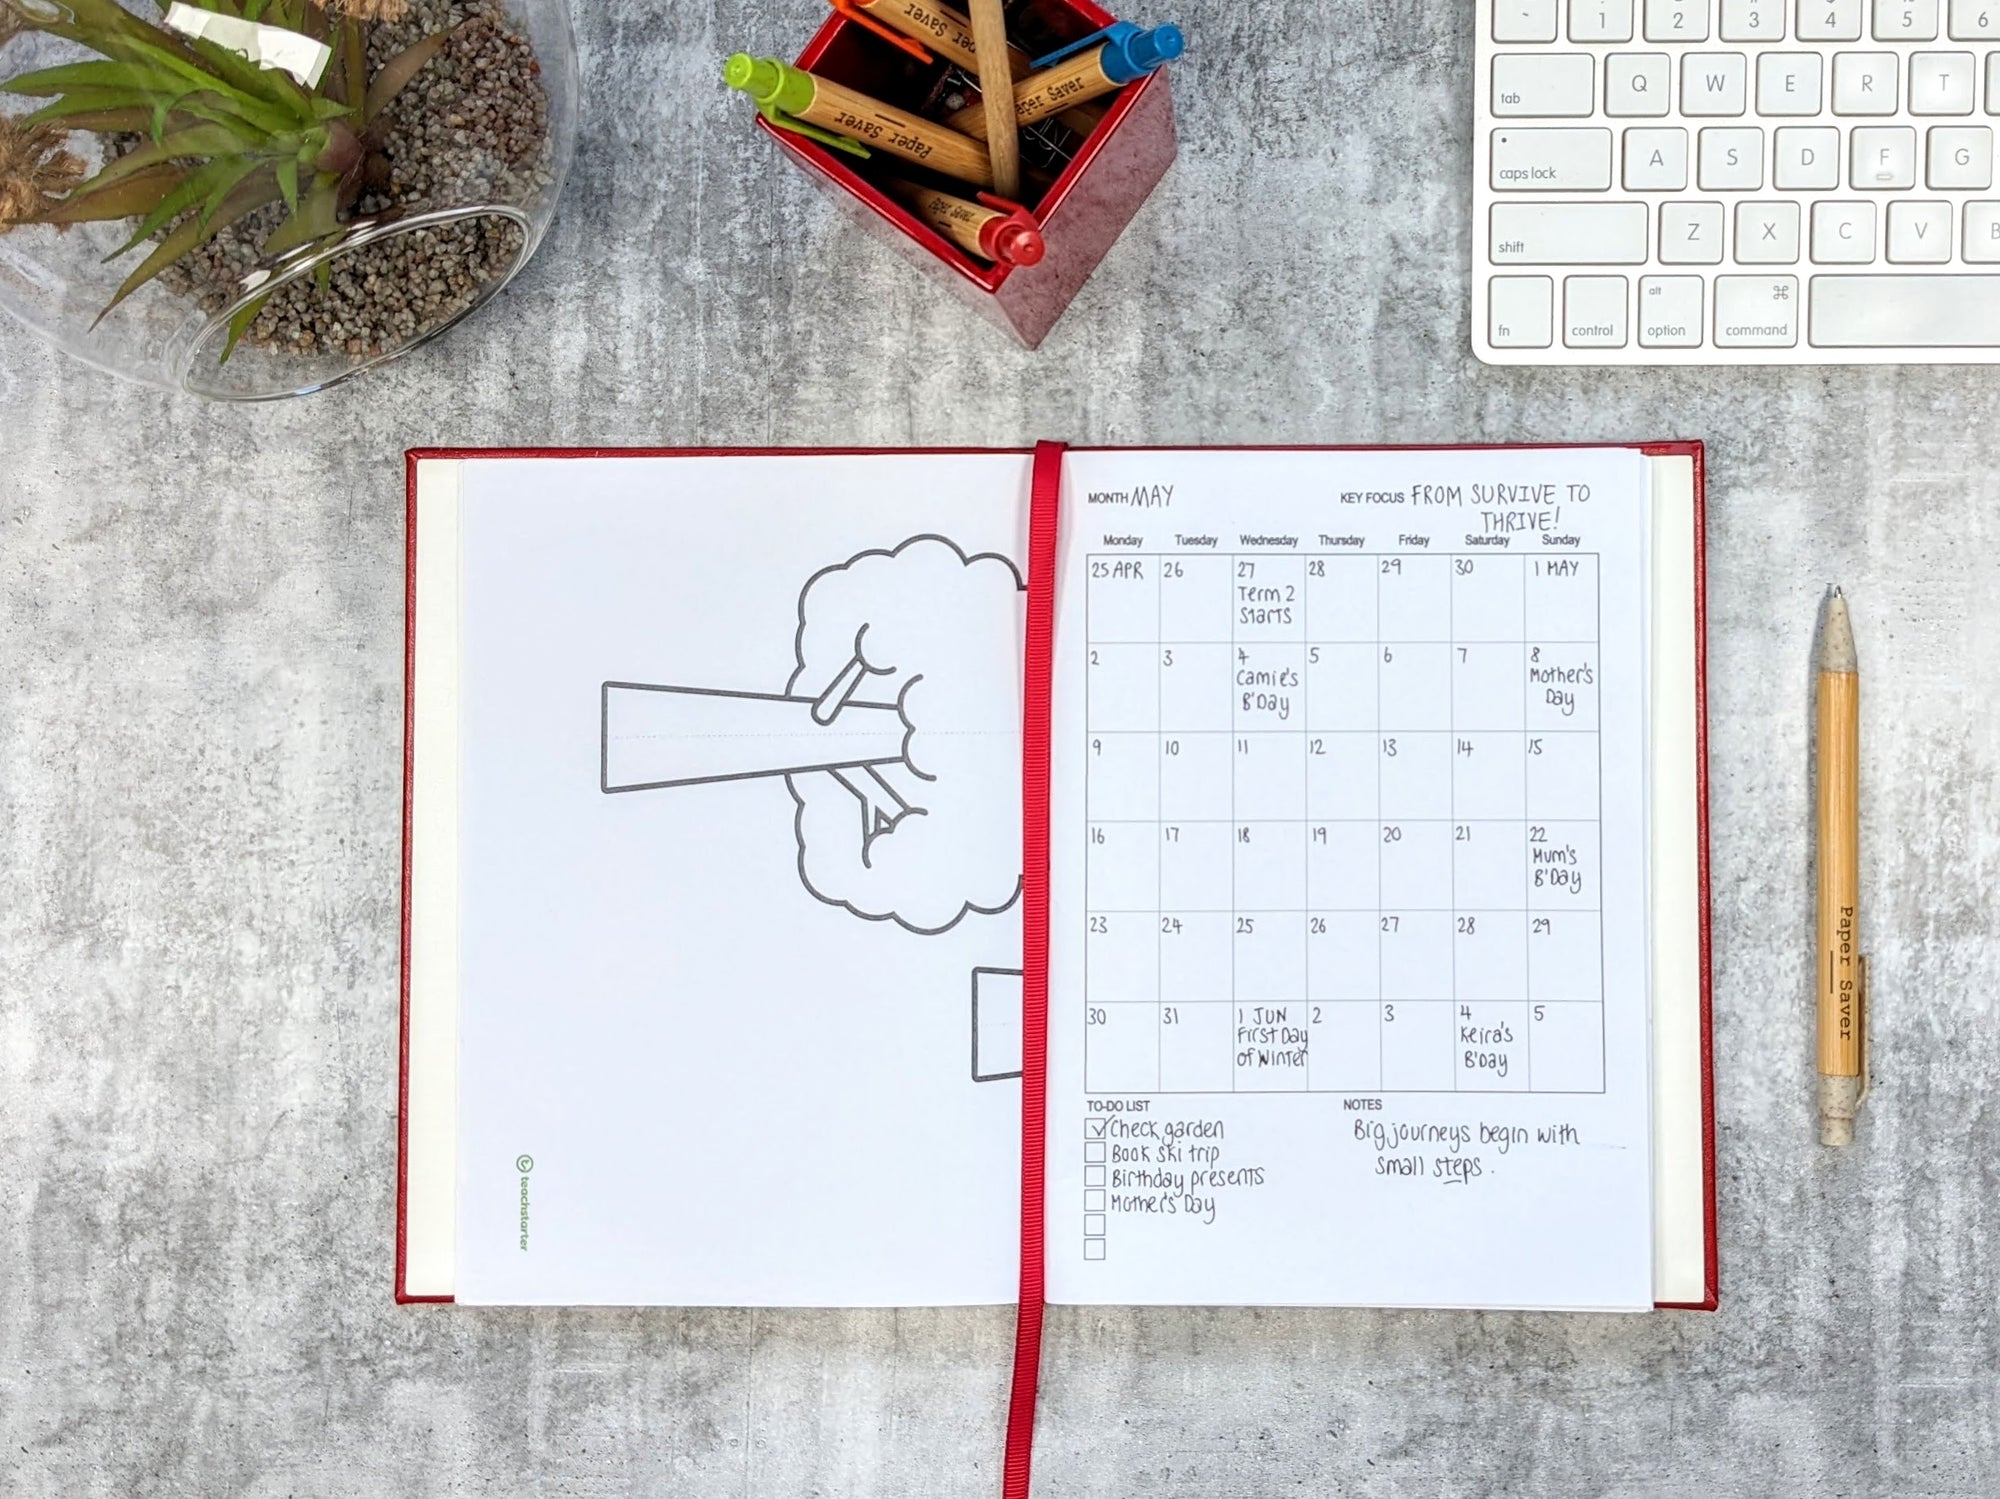 The Paper Saver Reusable Notebook is the neat, stylish, and organised way to reuse paper as pages for a more sustainable lifestyle and greener office.